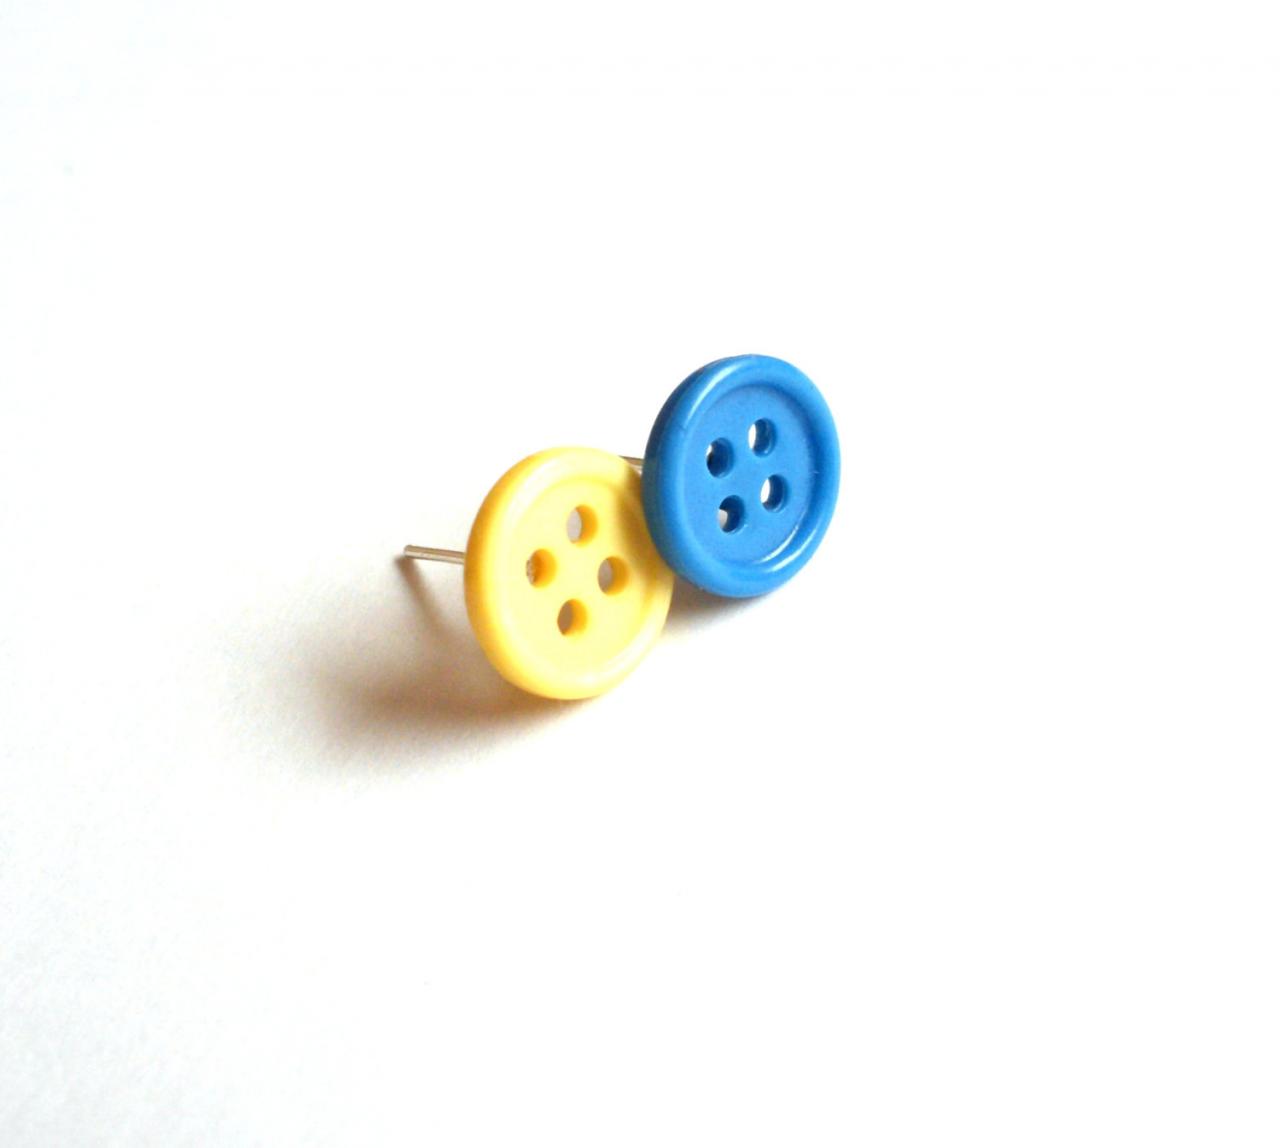 Buttons Post Earrings Yellow Blue Handmade Of Repurposed Vintage Buttons - Ecofriendly, Upcycled Jewelry, Recycled, Modern, Minimalist